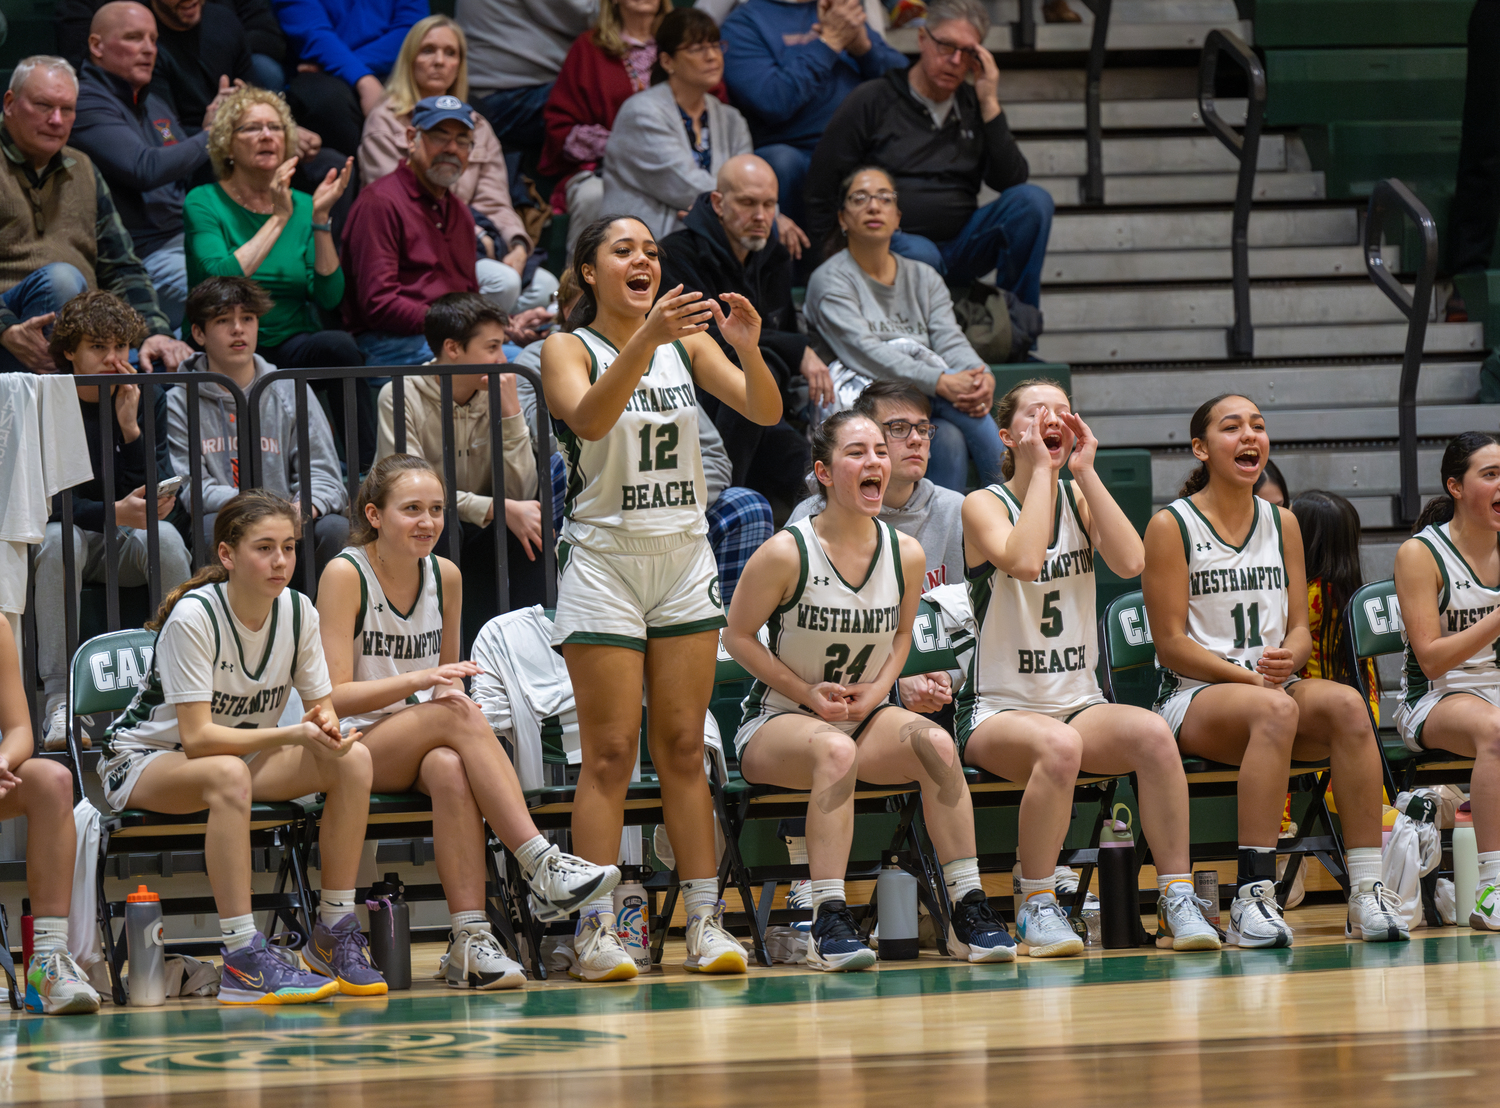 Westhampton Beach senior Zoe Stokes leads the cheers for her team on the court.    RON ESPOSITO